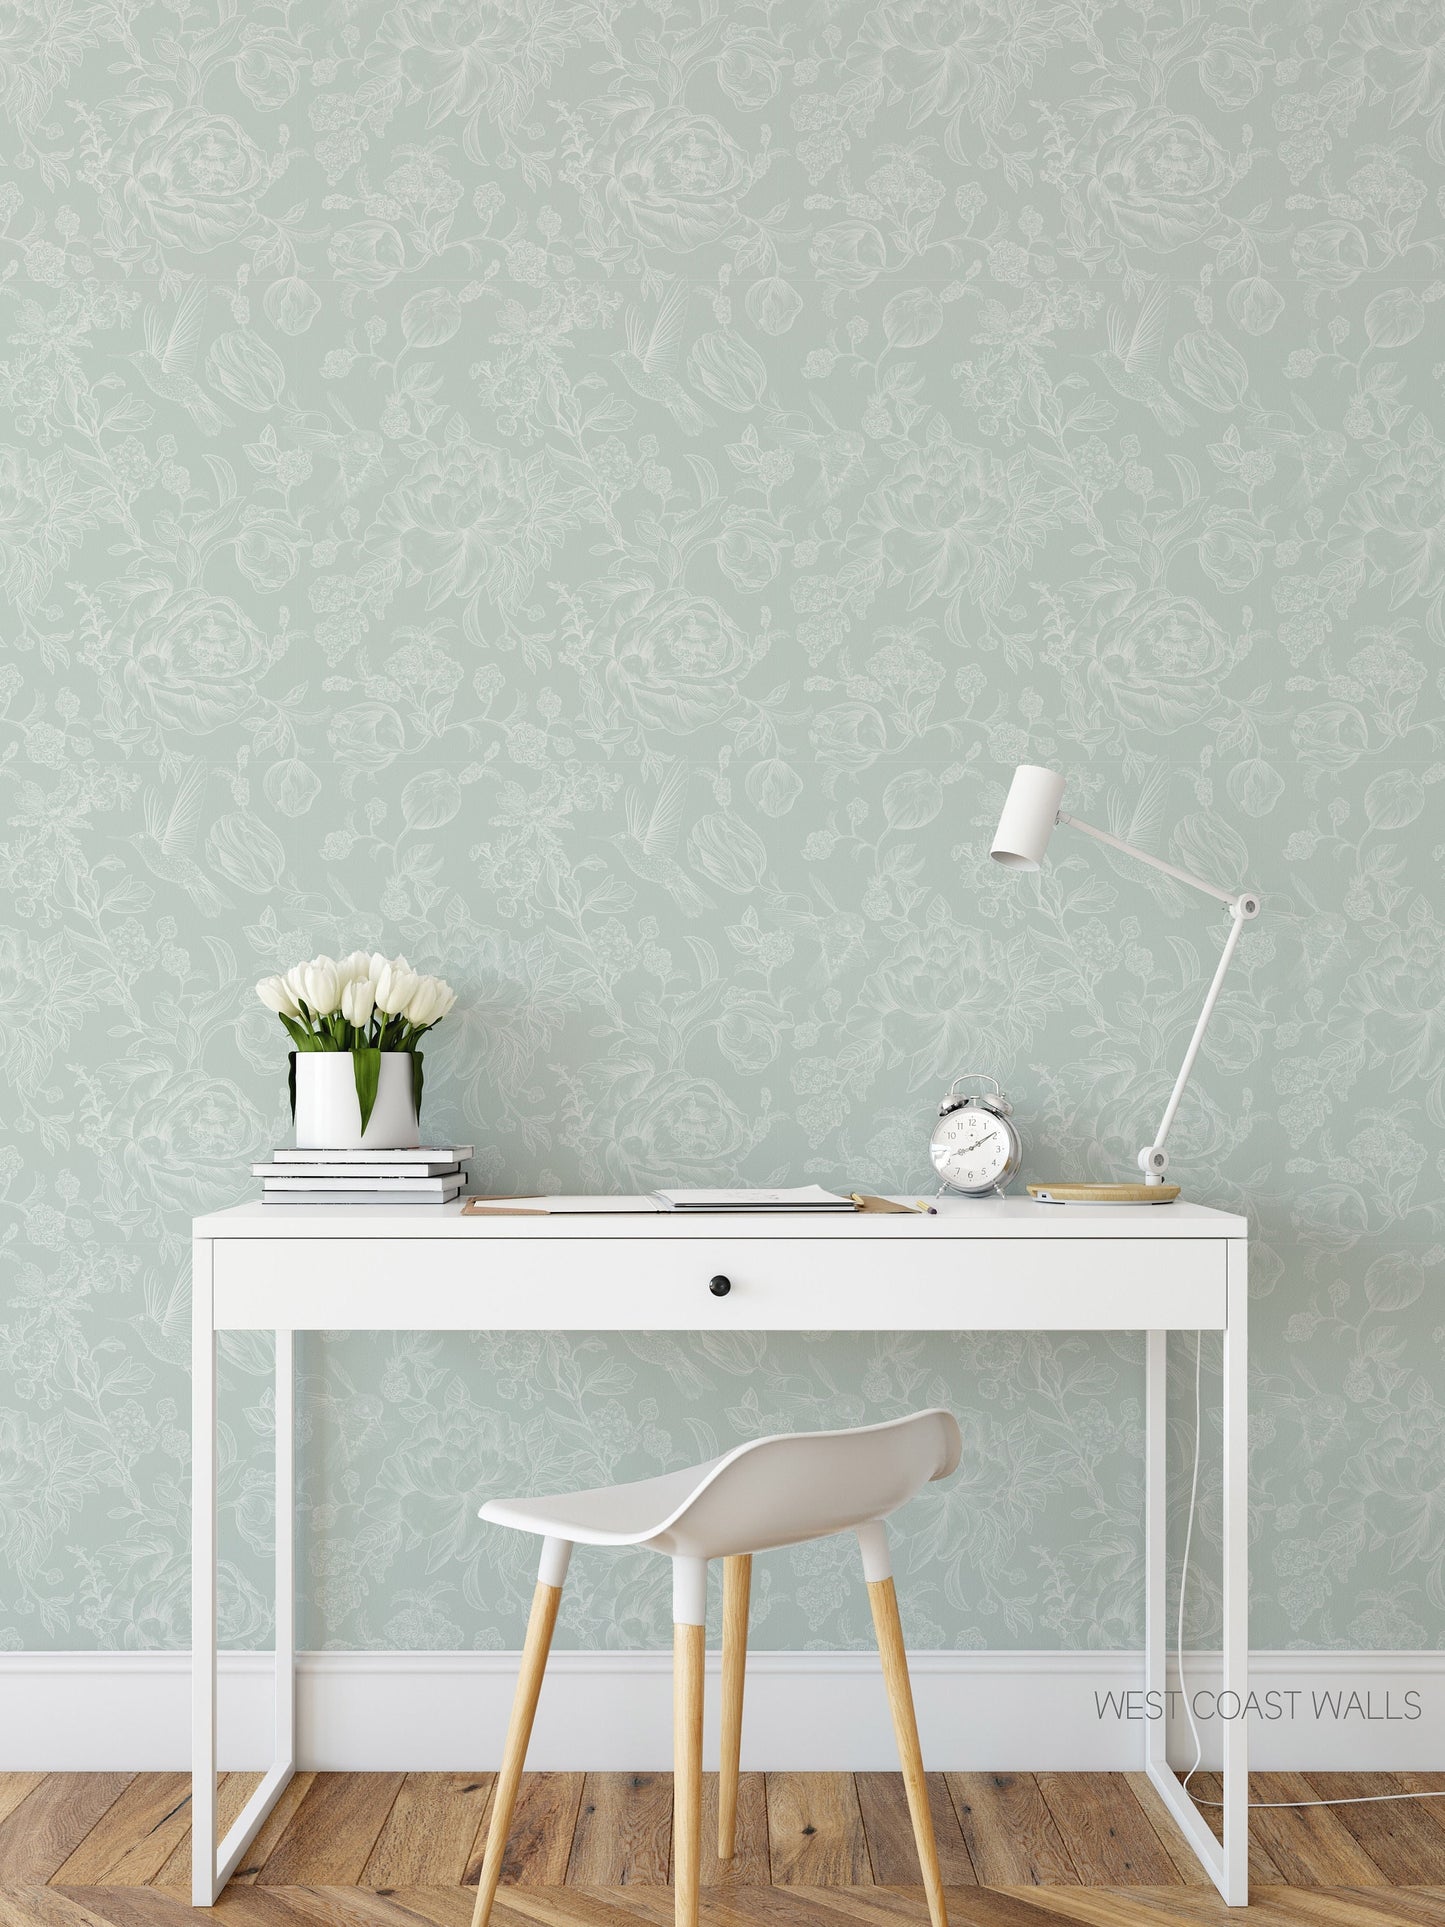 Hummingbird Blooms Wallpaper - Alternate Colours Available / Vintage Floral Design / Floral Feature Wall / Hand Drawn Floral